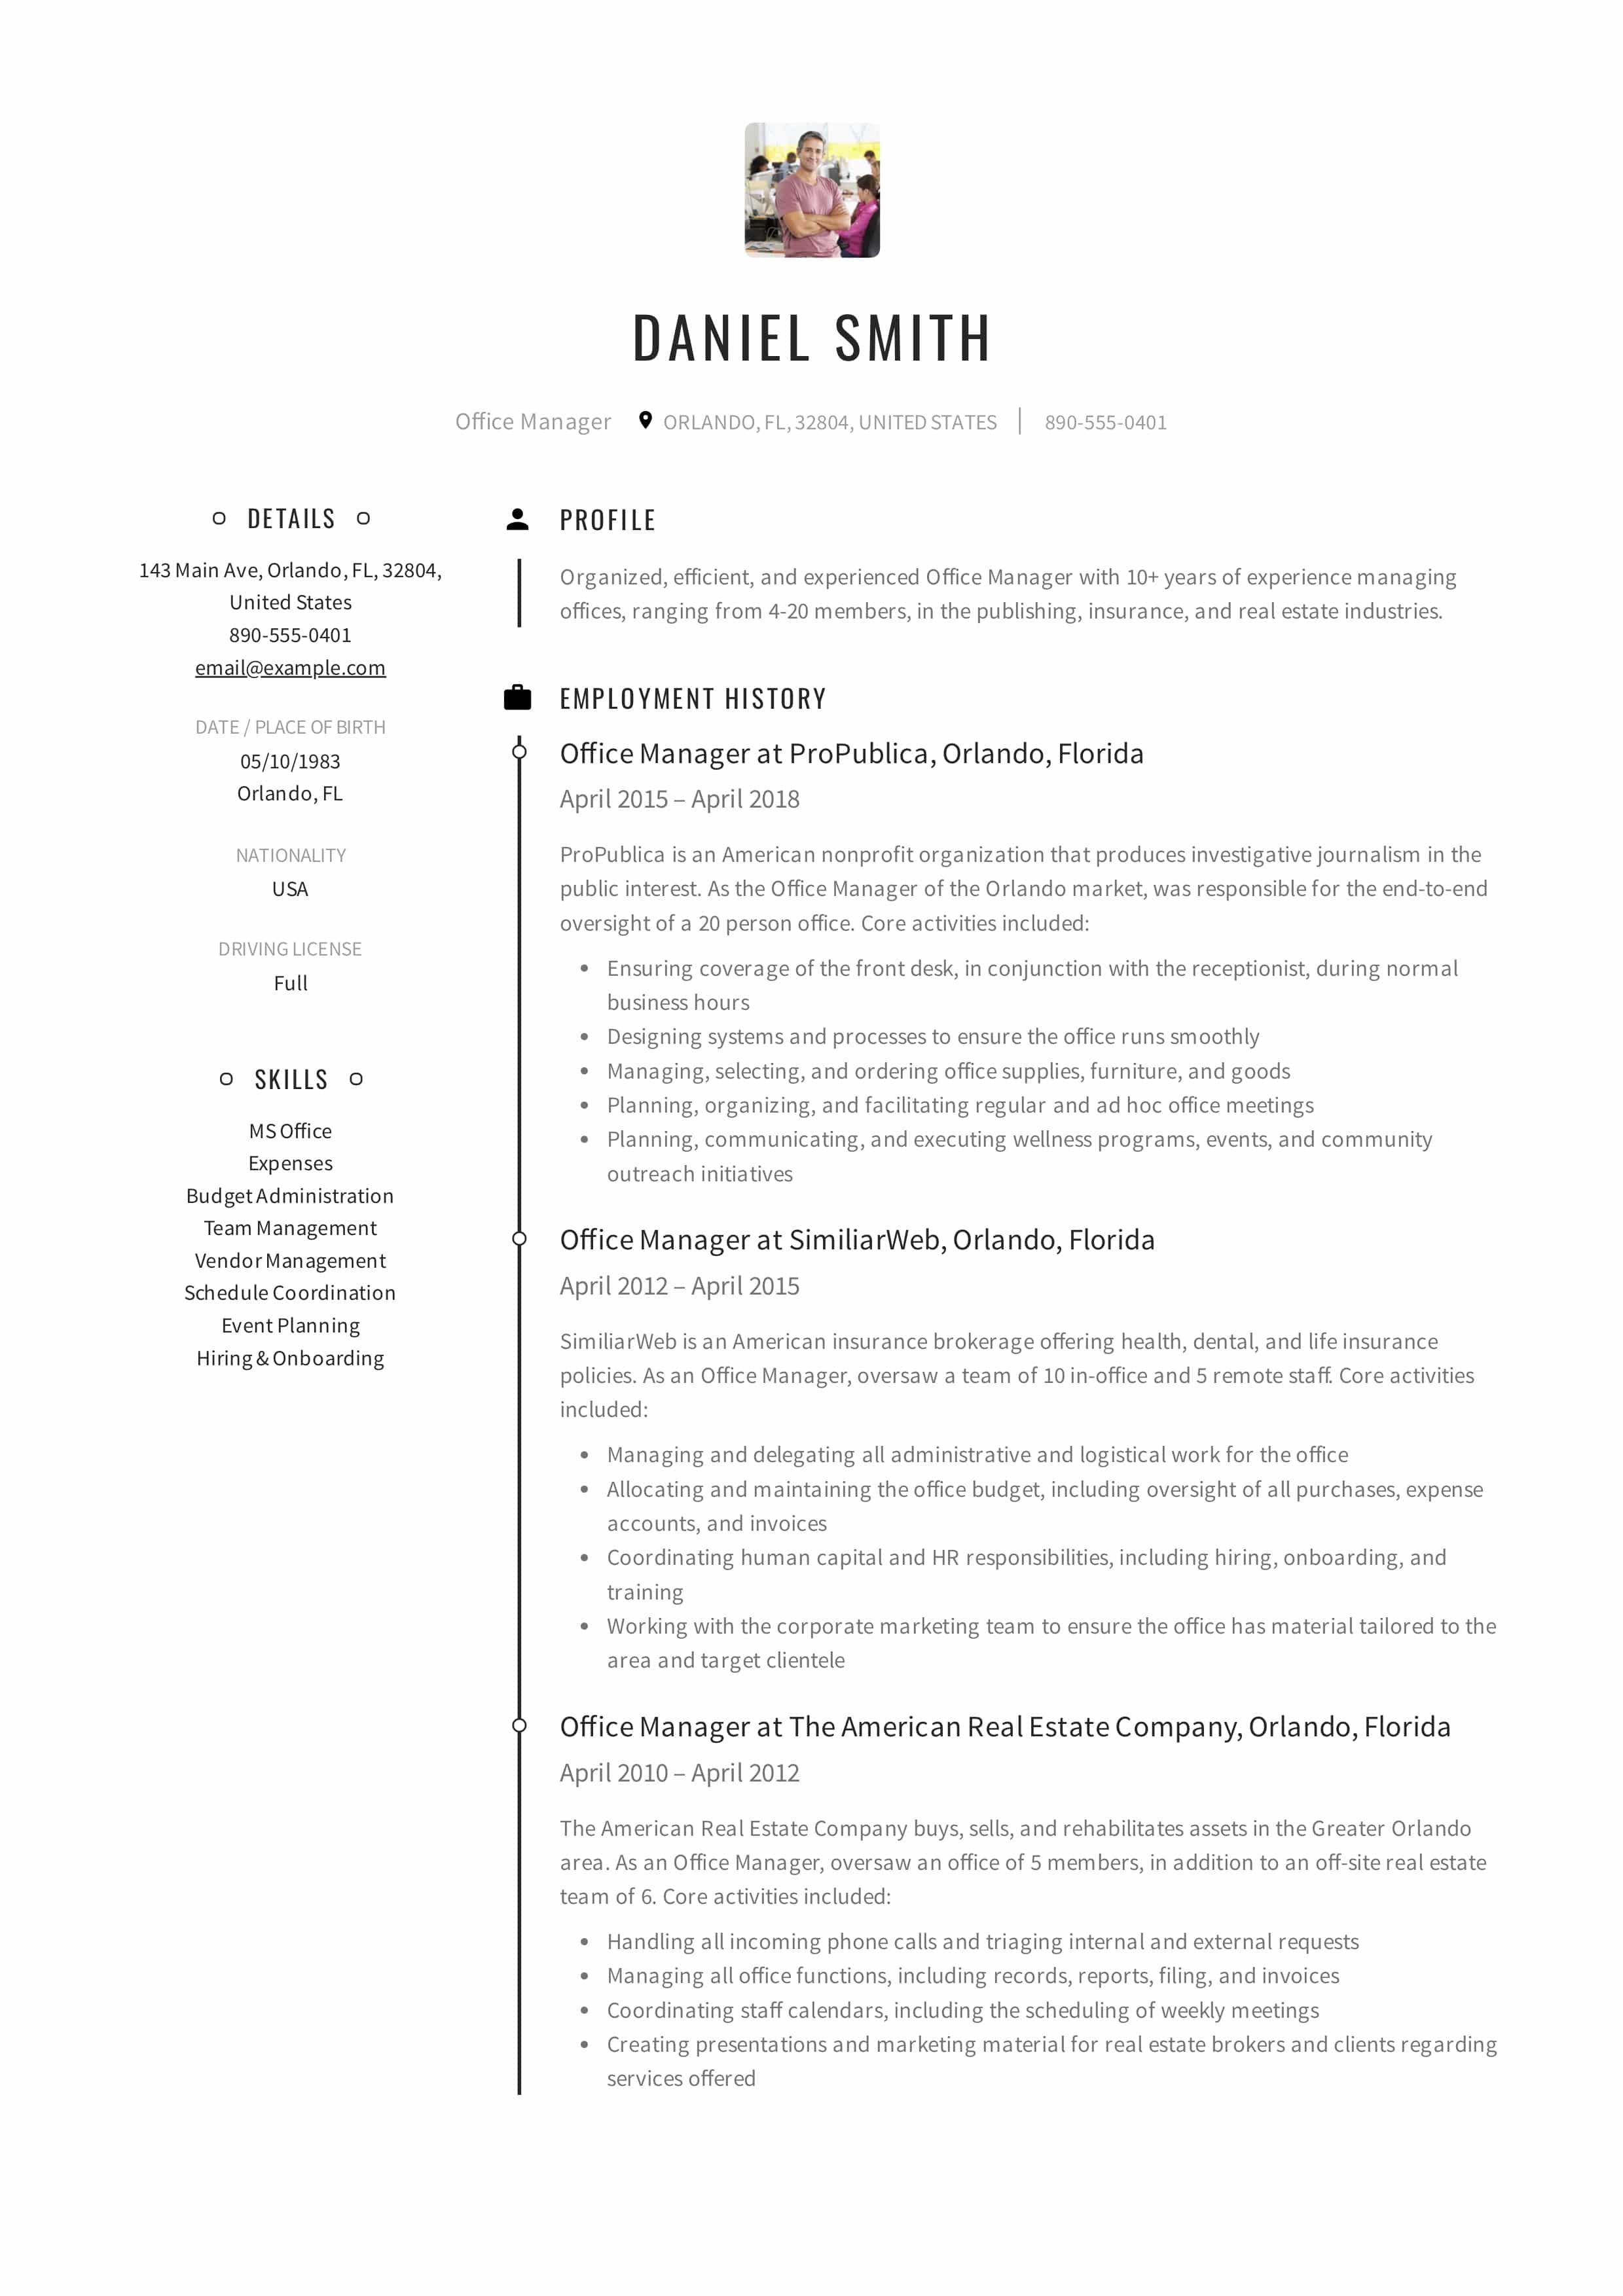 Resume Examples Office  Guide Office Manager Resume 12 Samples Pdf 2019